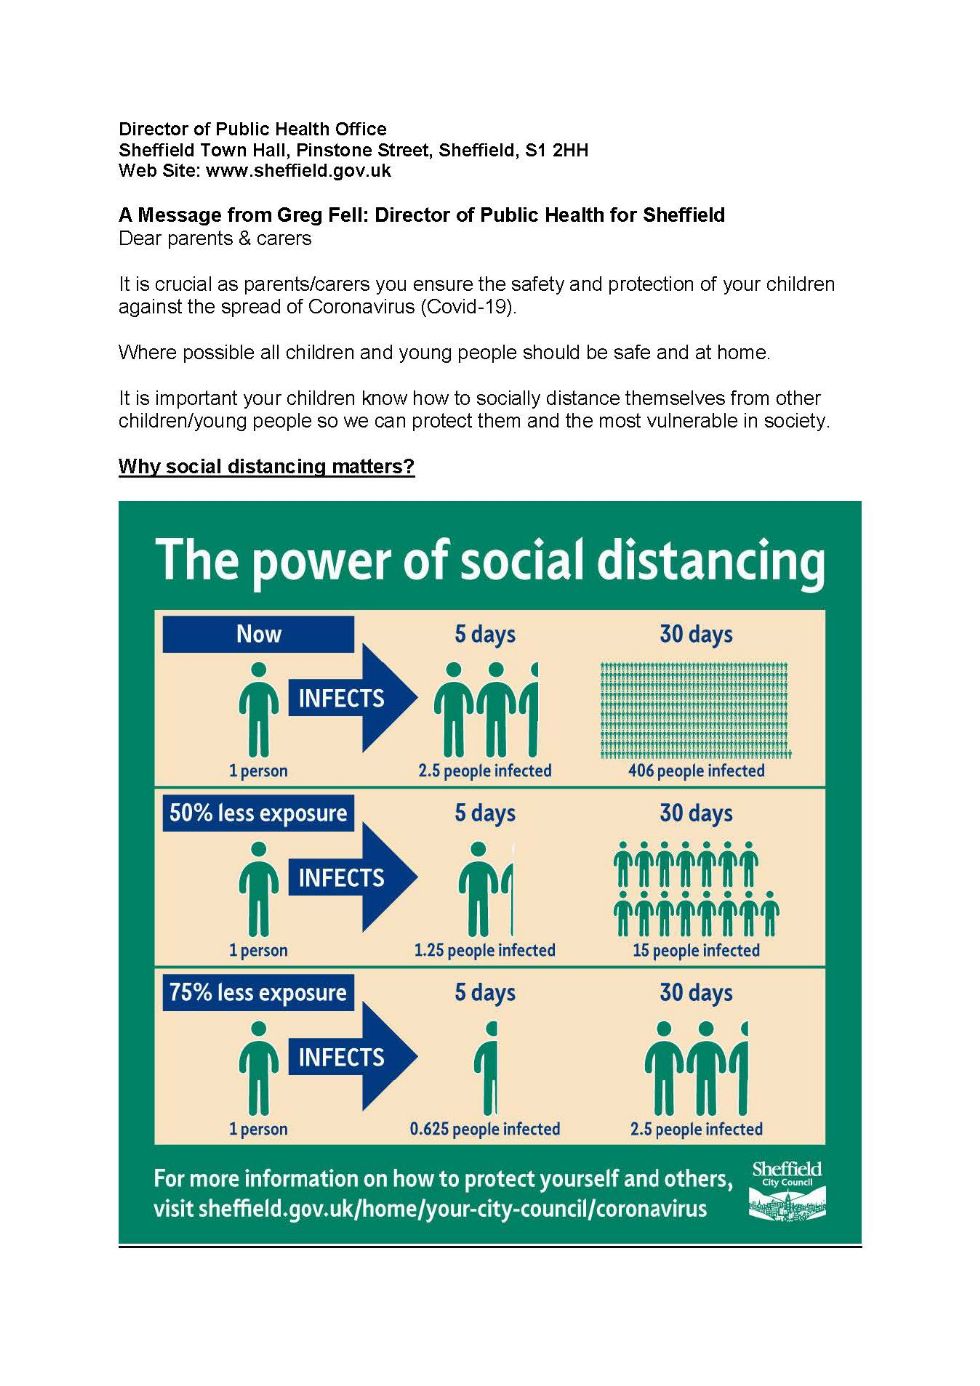 social distancing advice for families